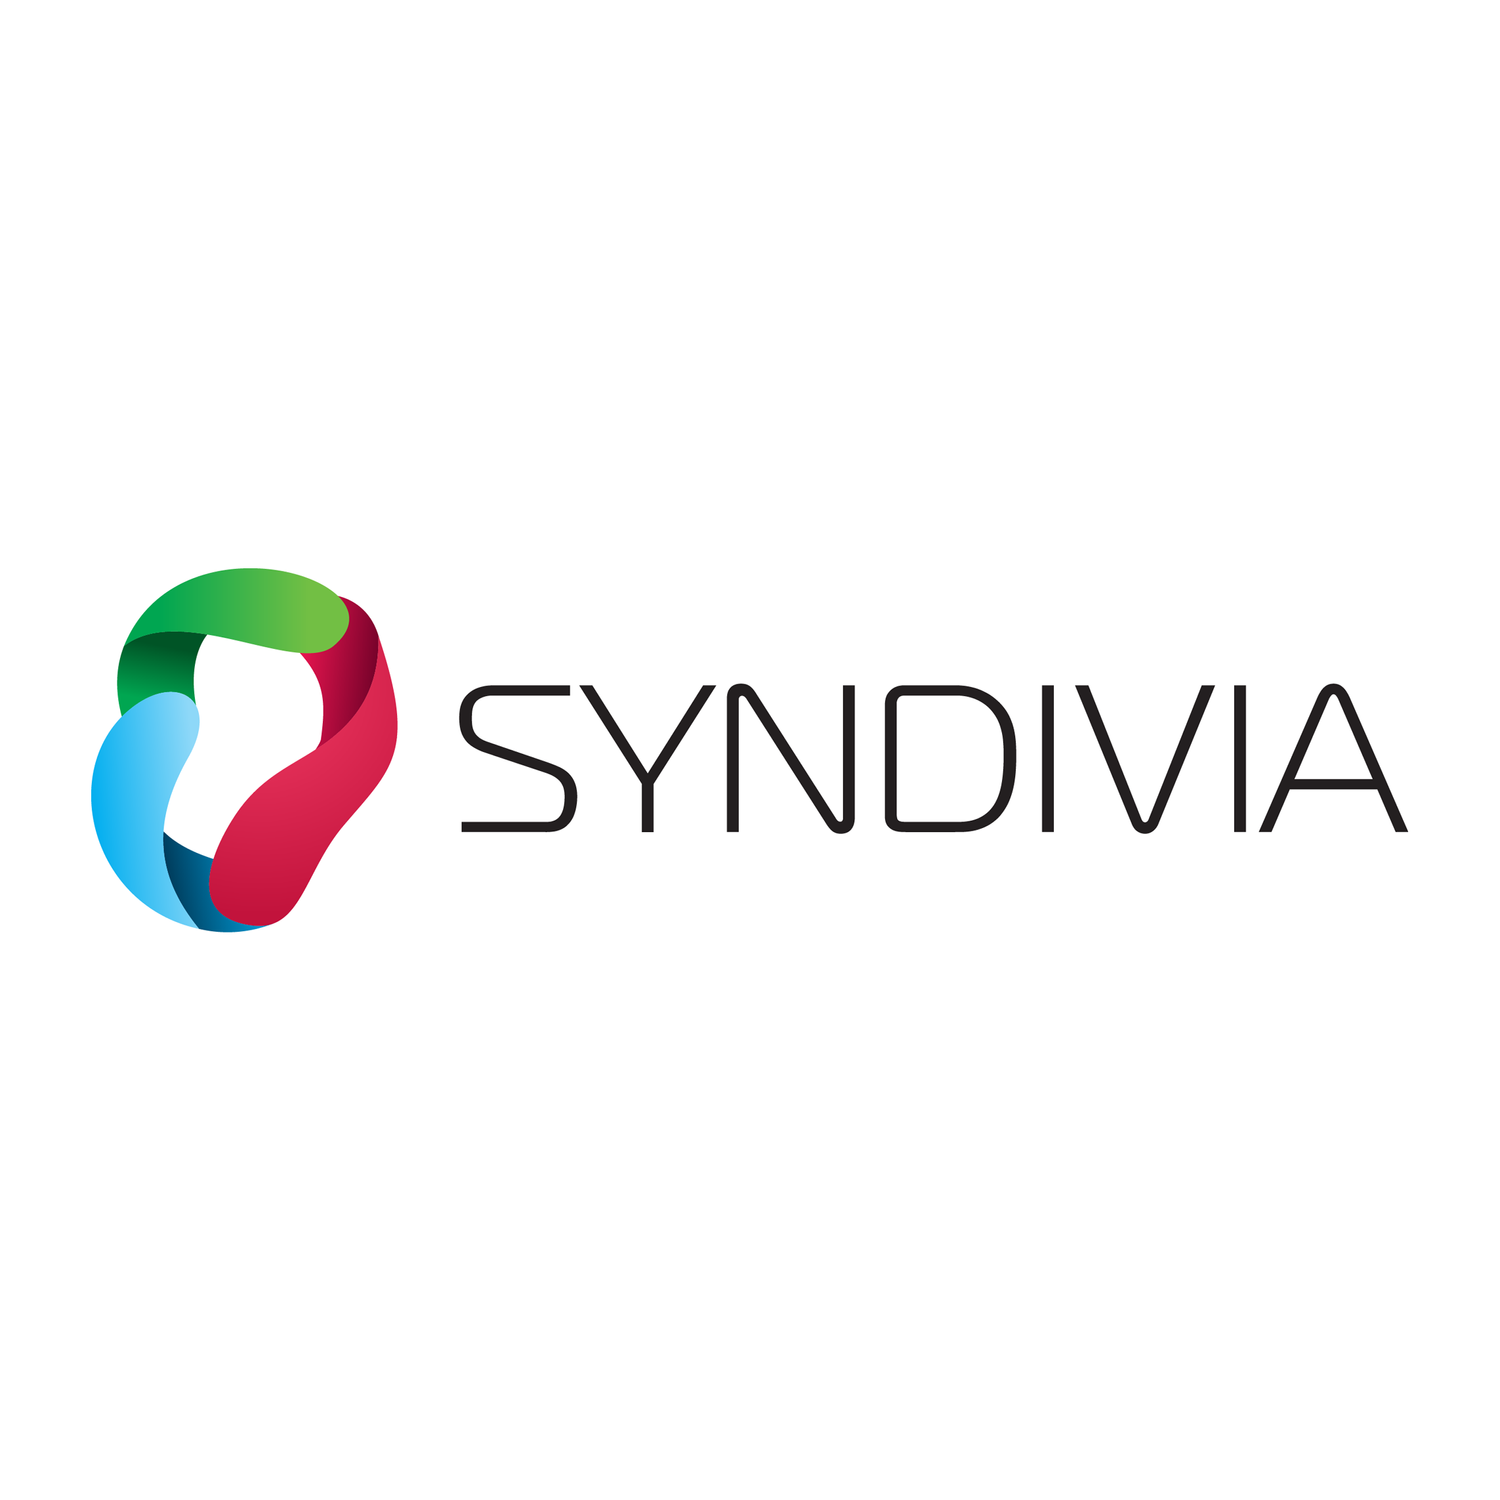 Syndivia – Making a difference in ADC with DAR1